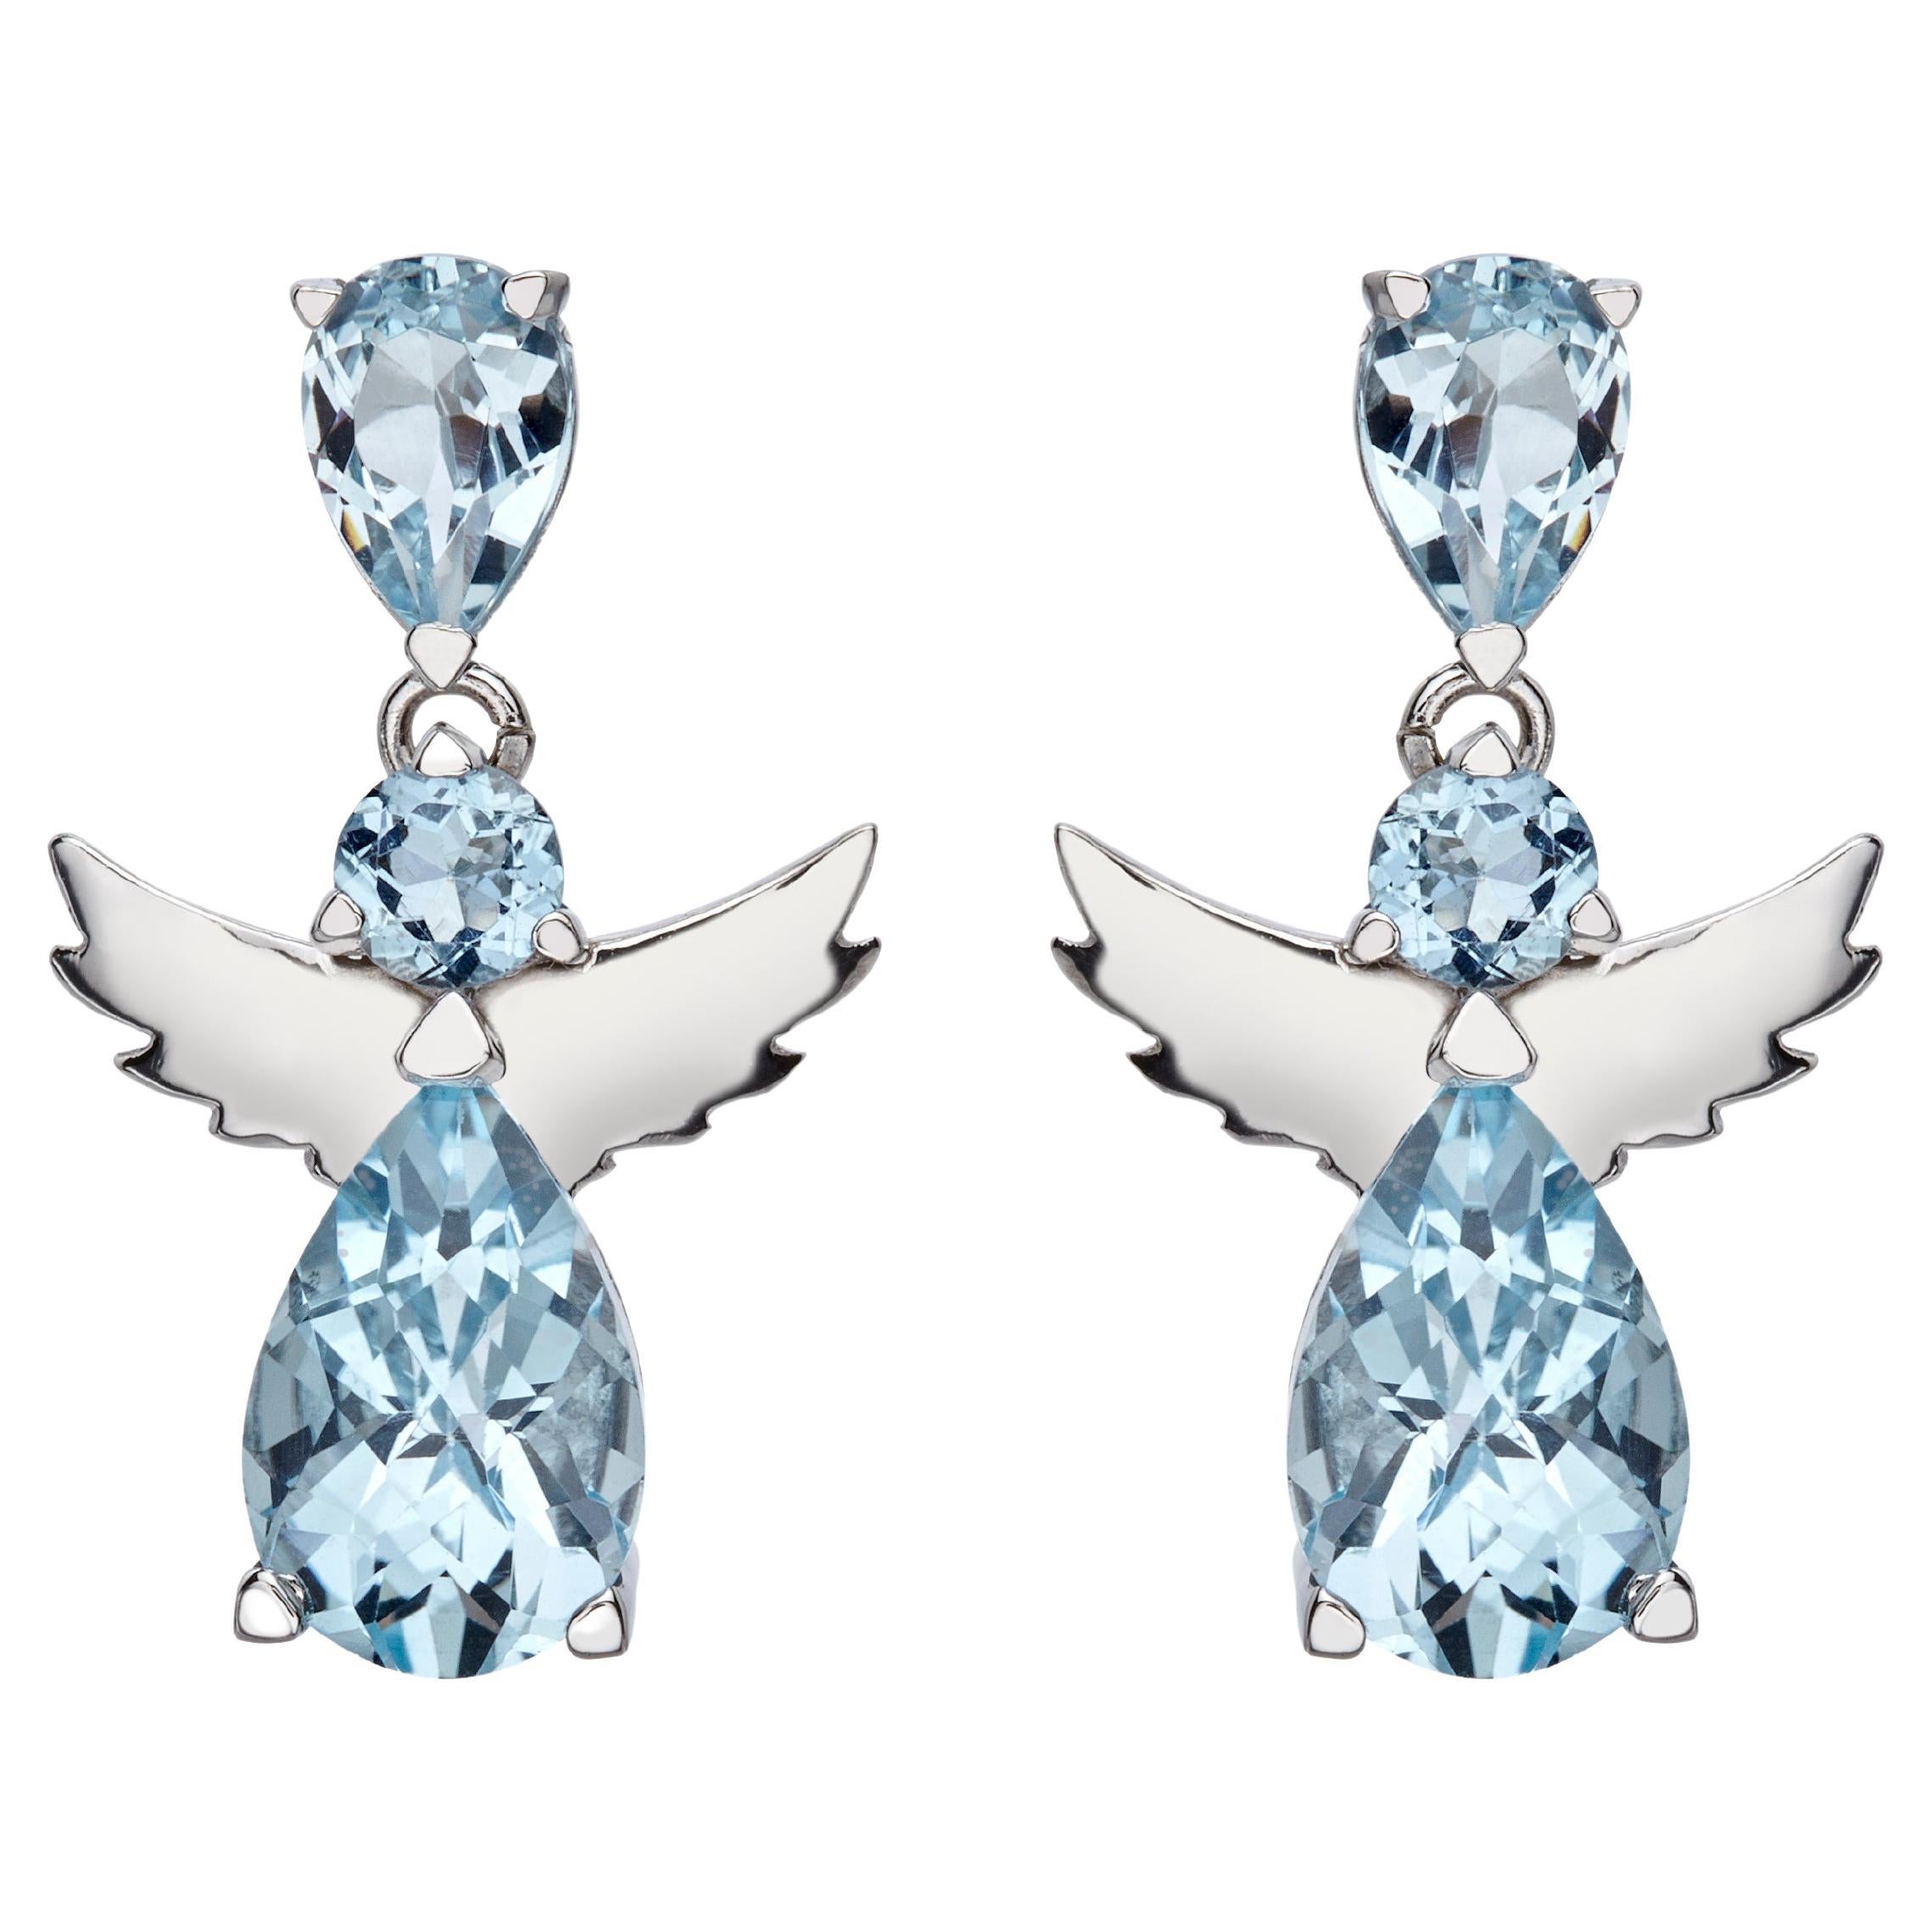 Angel Drop Earrings 18Kt White Gold with Pear and Round Blue Topaz Gift for Her